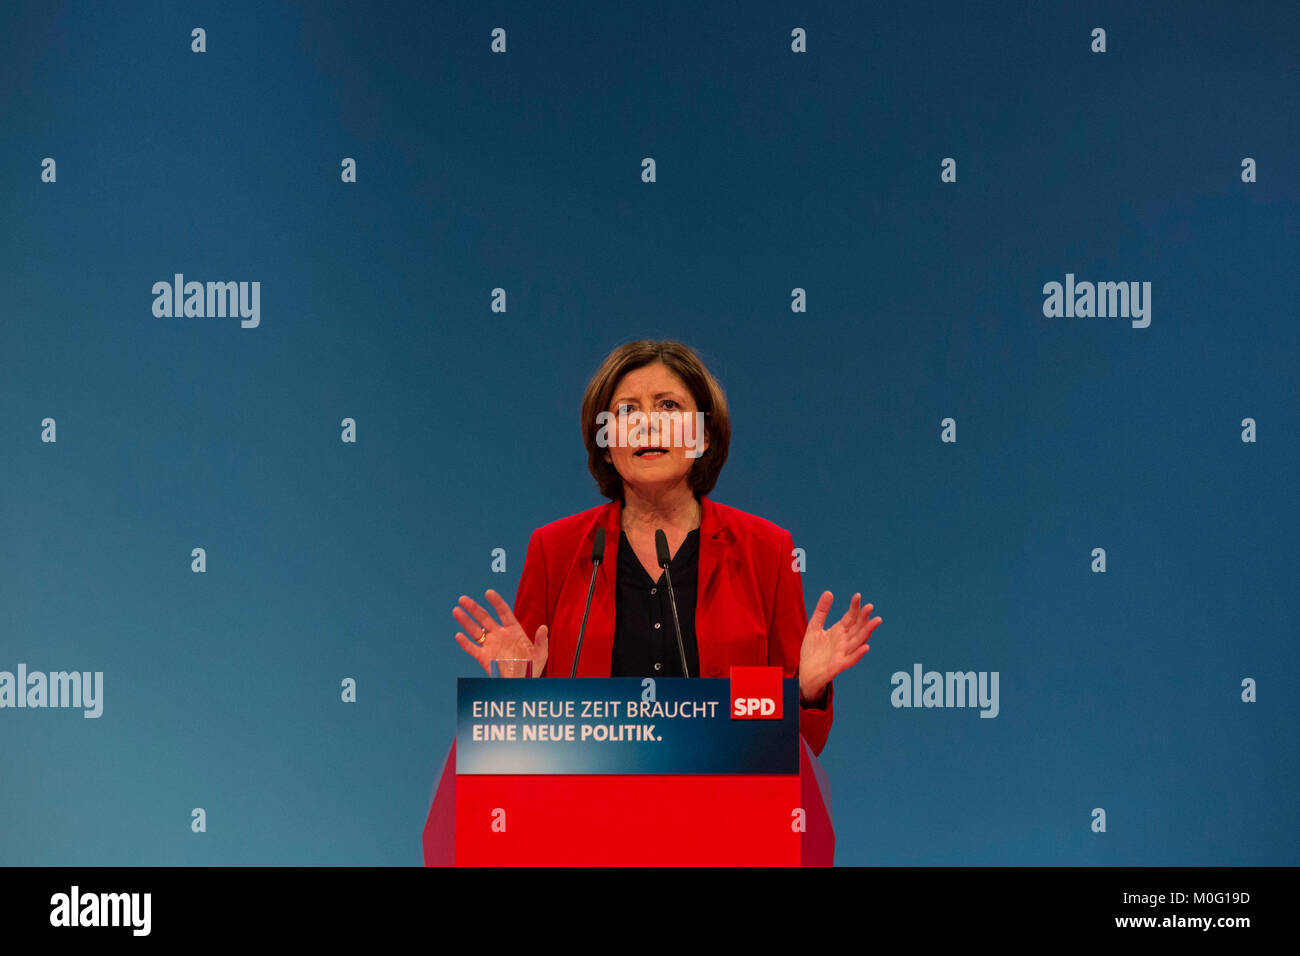 Bonn, Germany. 21 January 2018. Malu Dreyer, Prime Minister of Rhineland-Palatinate. SPD extraordinary party convention at World Conference Center Bonn to discuss and approve options to enter into a grand coalition with the CDU, Christian Democrats, before asking SPD members for approval. Stock Photo